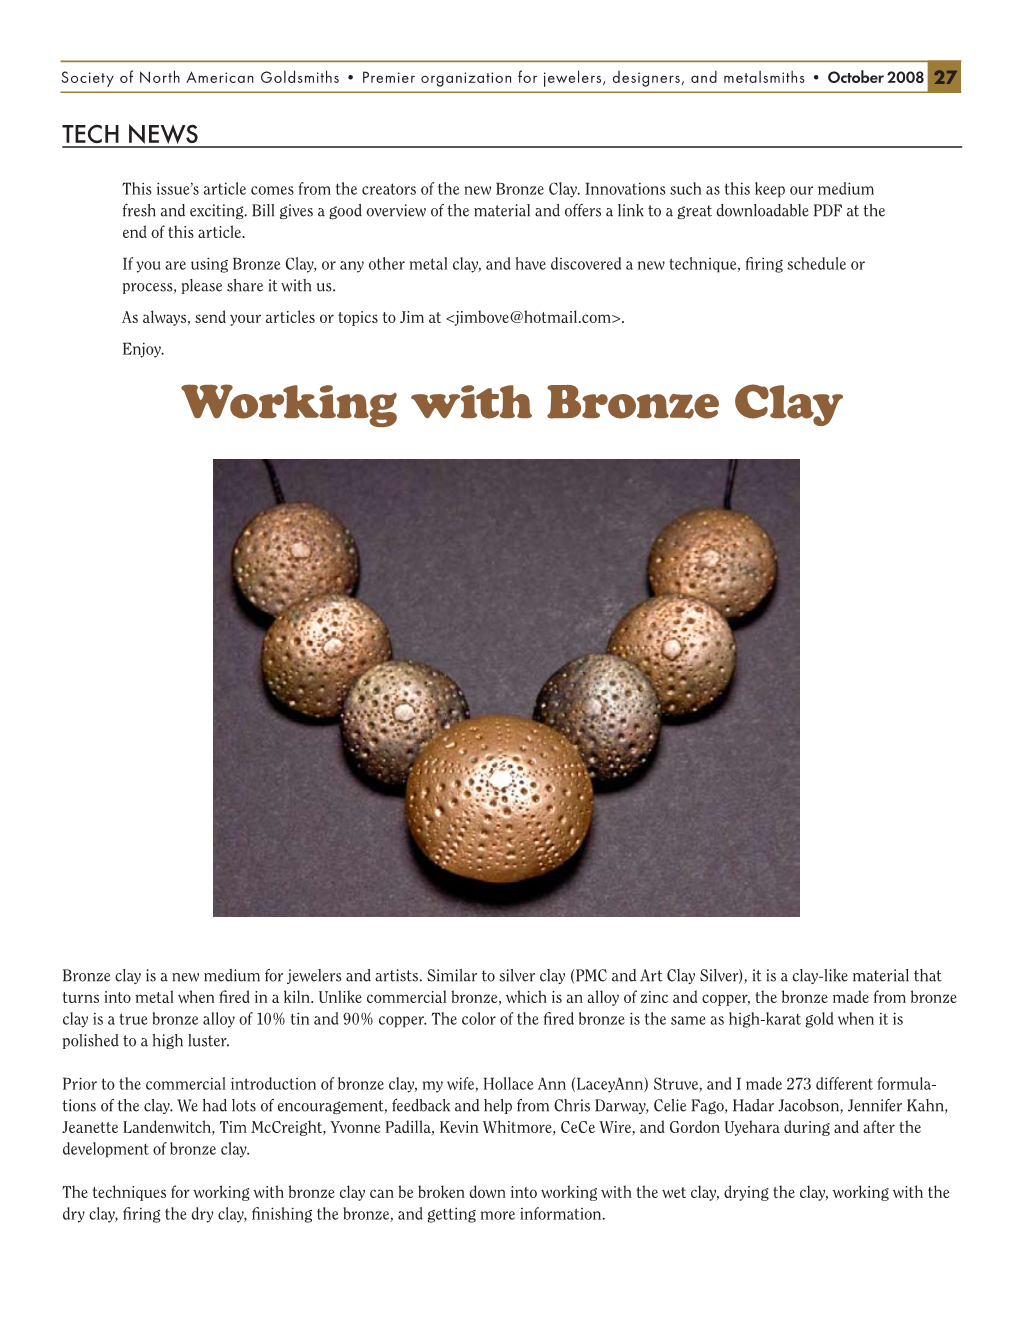 Working with Bronze Clay